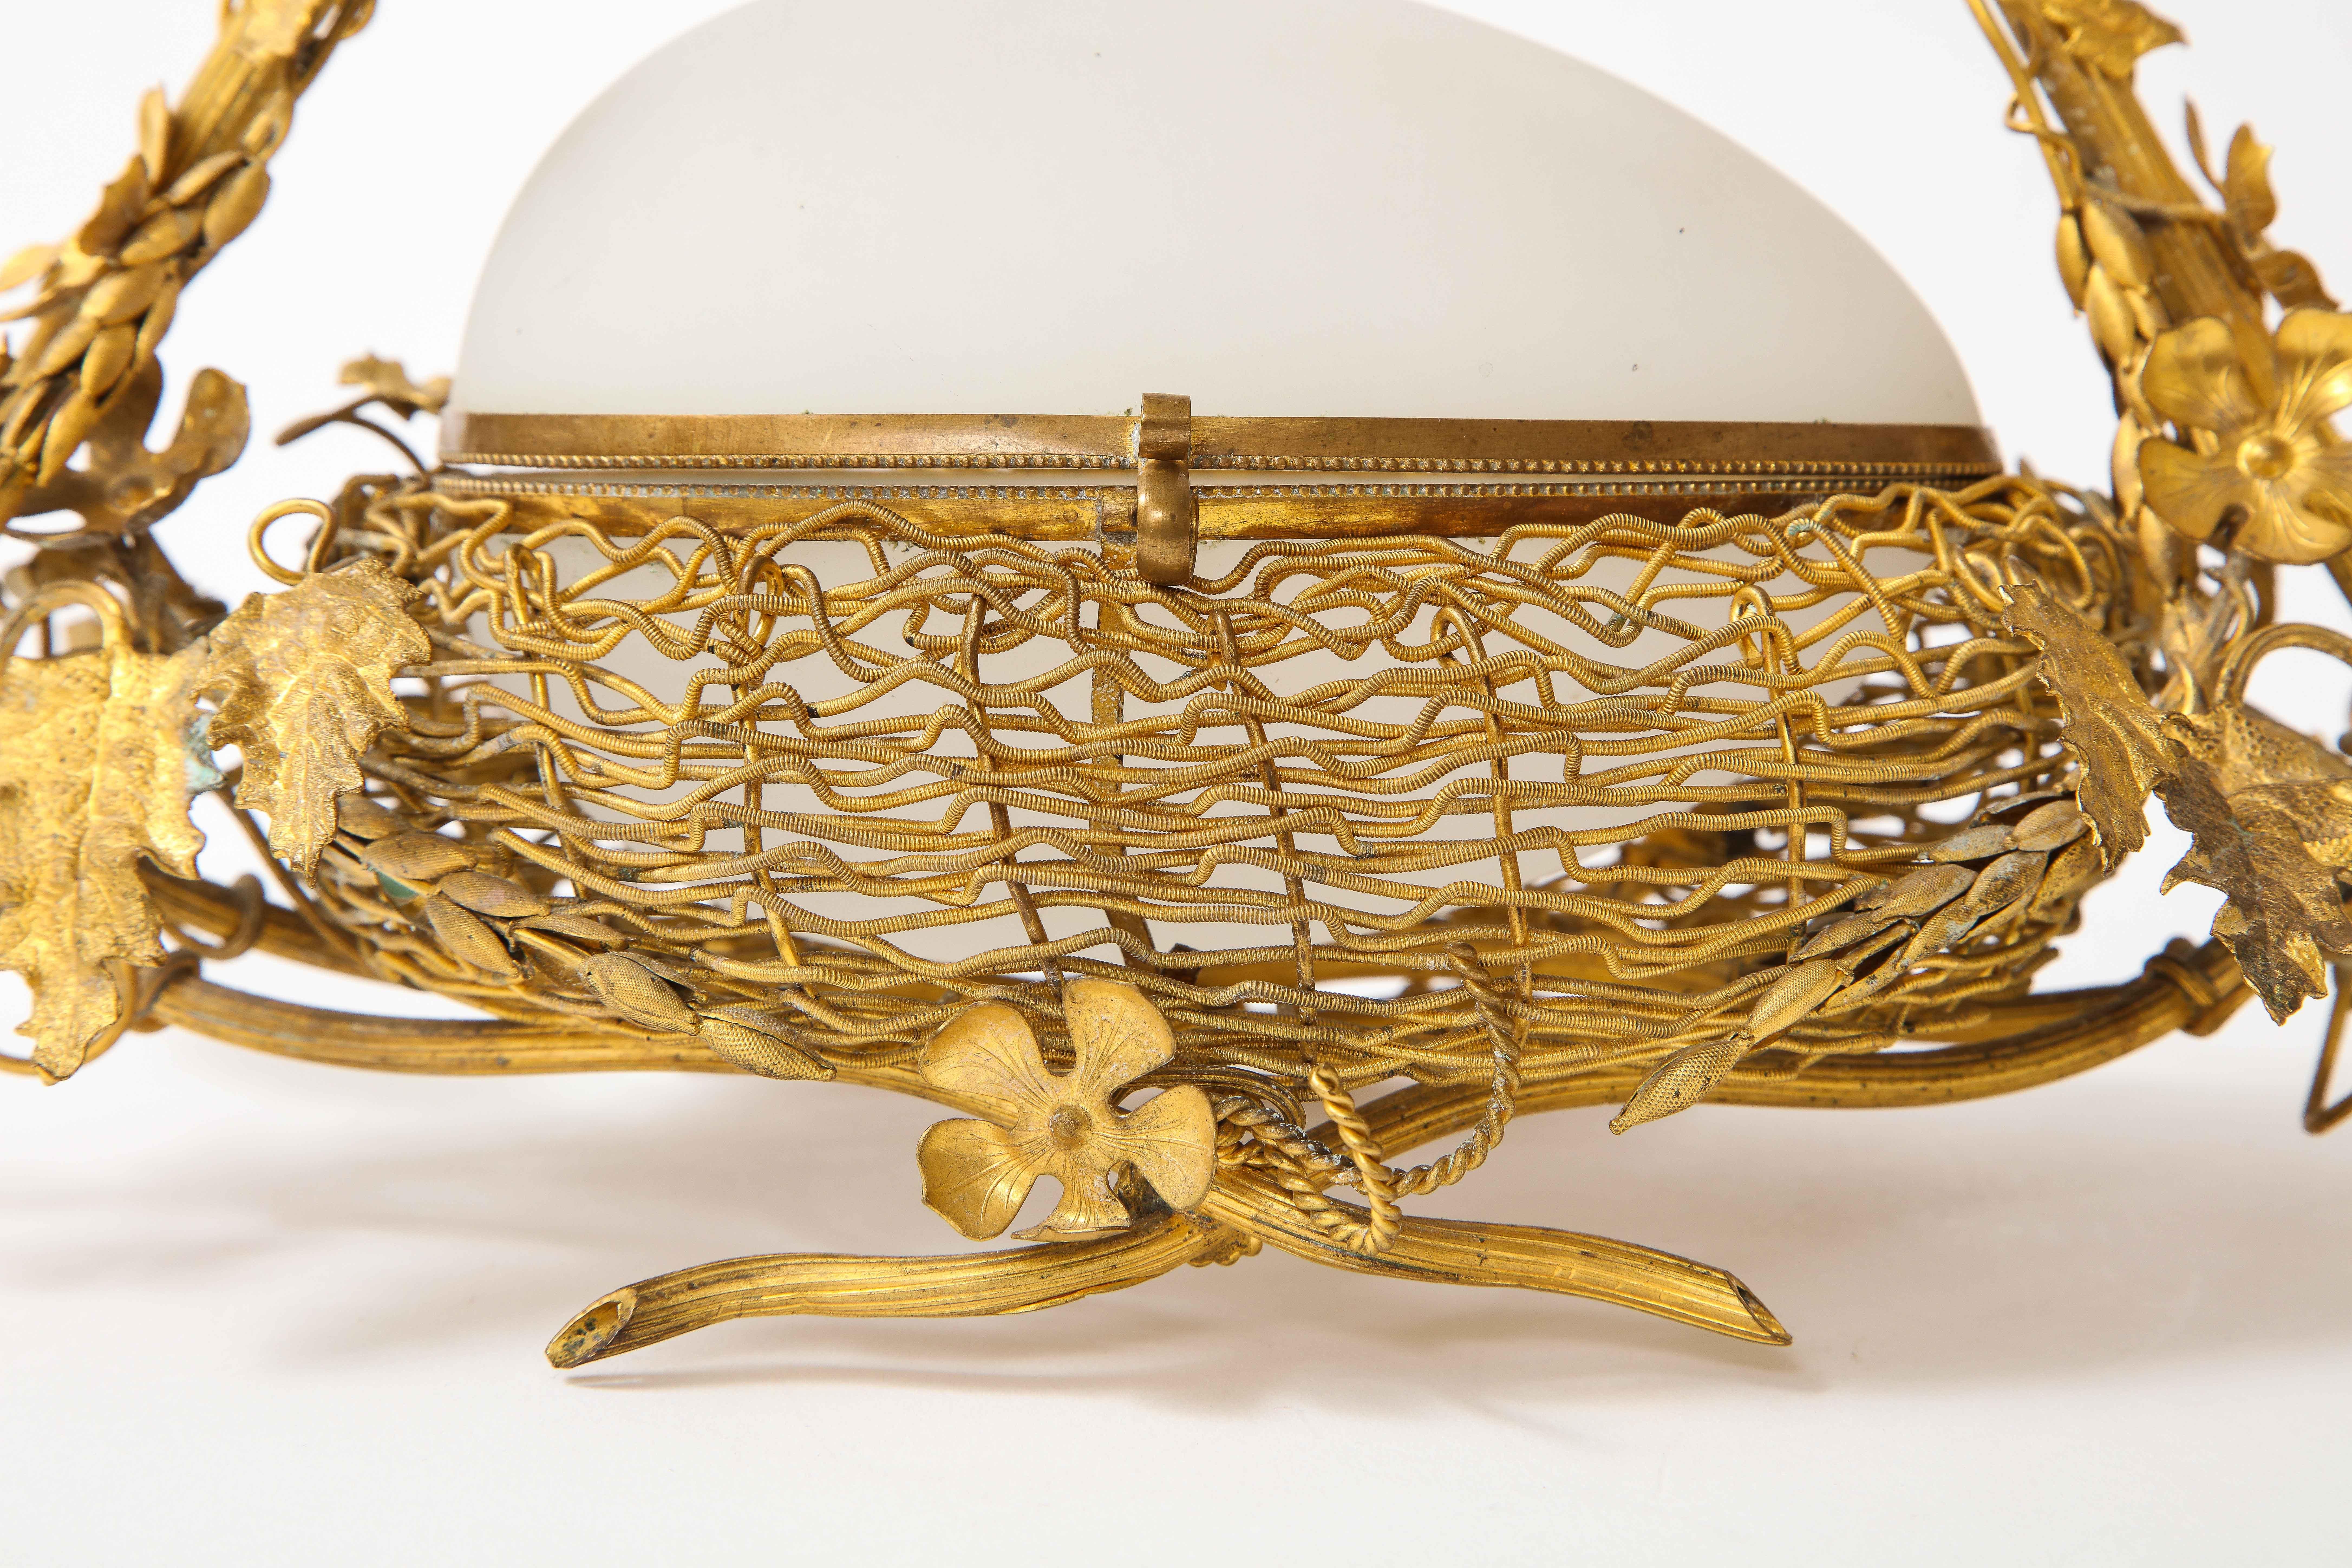 A 19th C. French Dore Bronze Mounted White Opaline Egg Form Covered Nesting Box For Sale 1